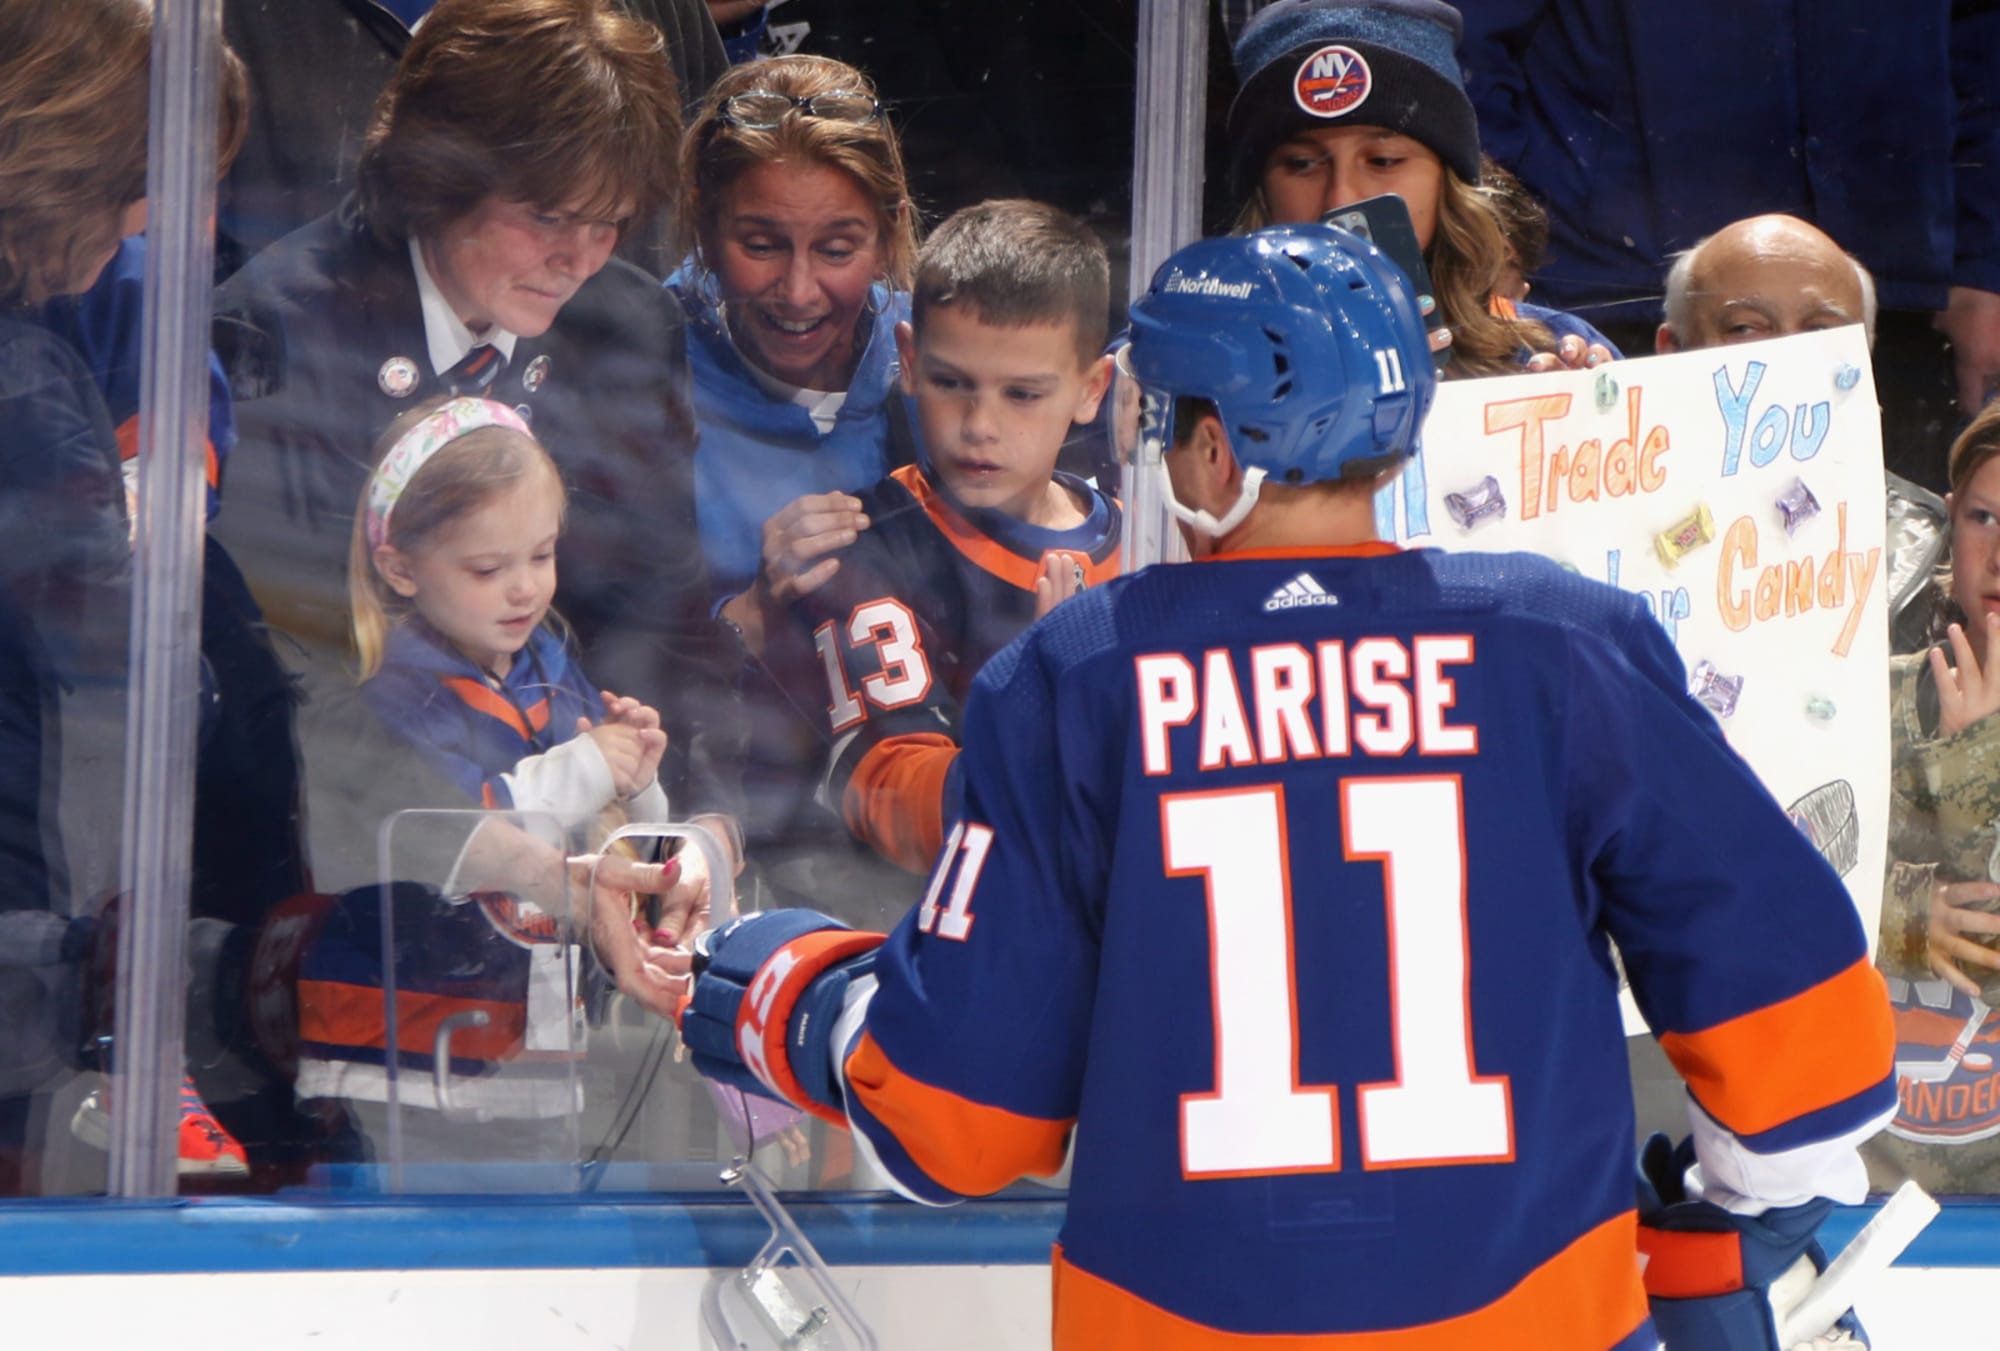 Islanders: Zach Parise can have biggest bounce-back season in 2022